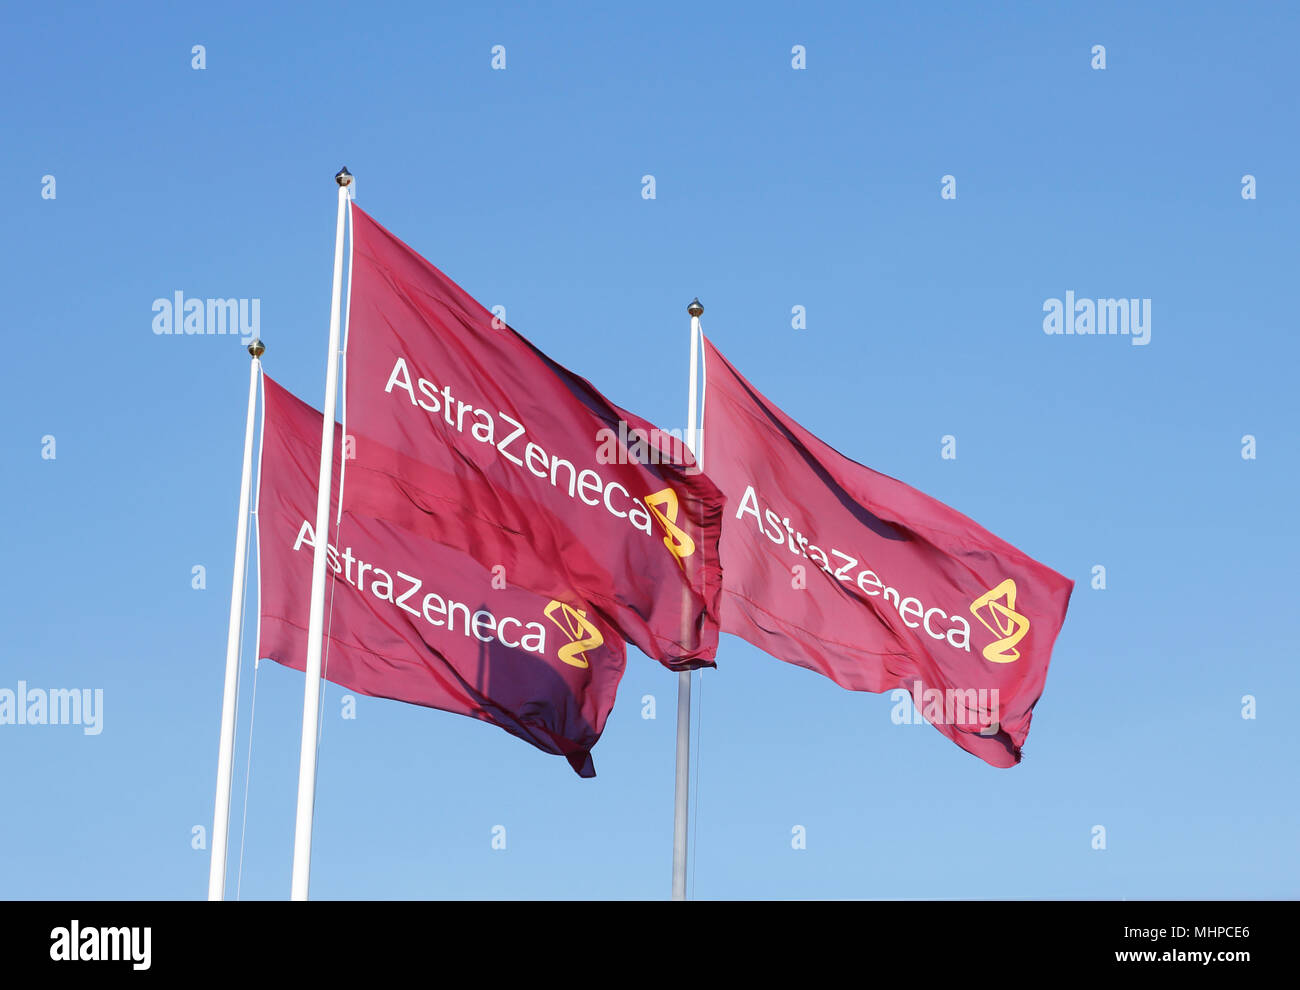 Sodertalje, Sweden - April 27, 2014: Three purple flags with the logo for Atrazeneca flying in the wind on top of the flagpoles against the blue sky. Stock Photo